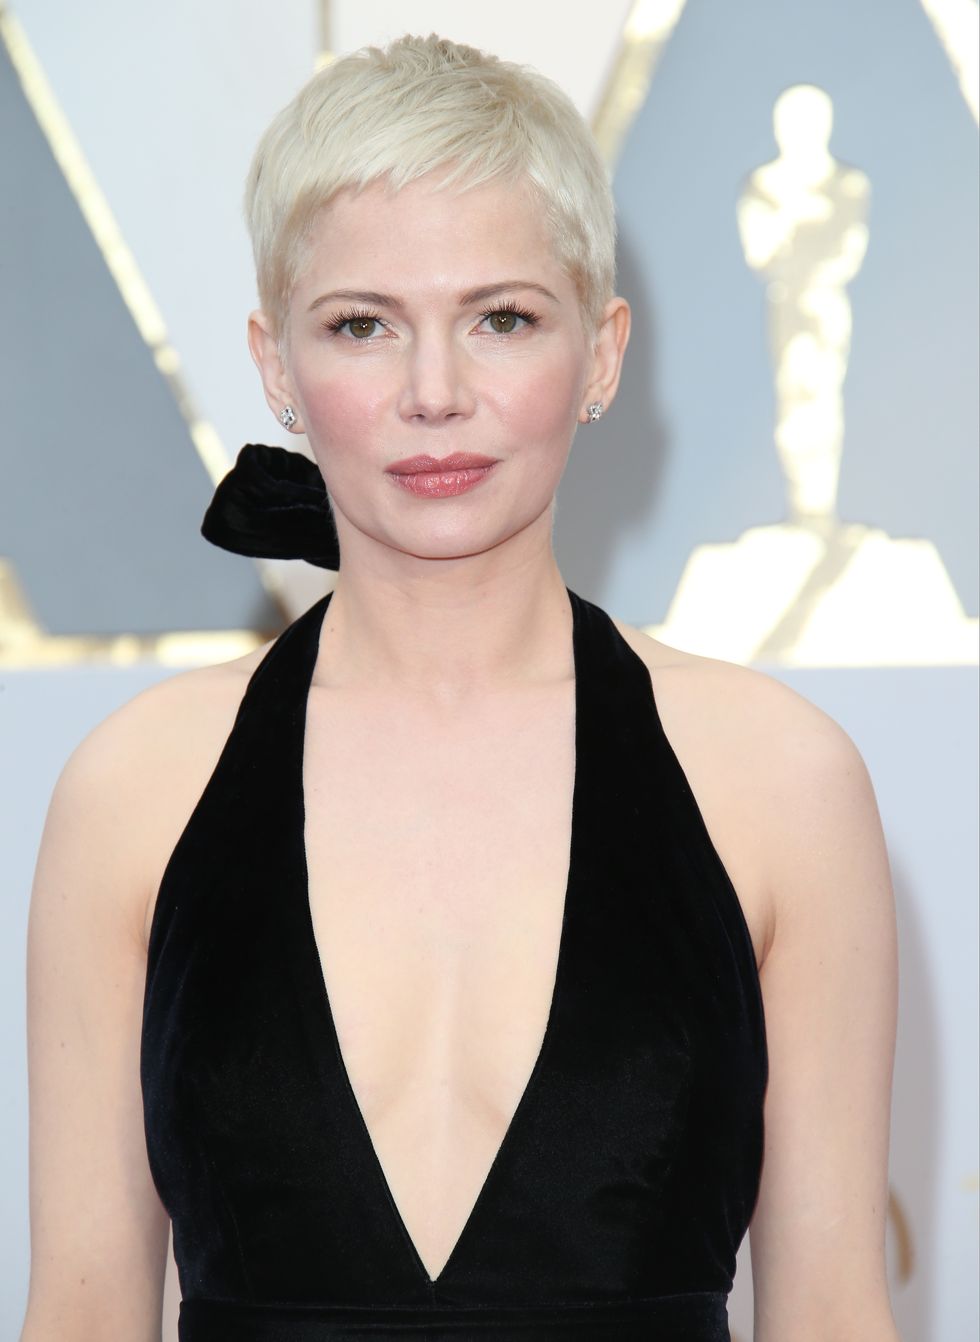 HOLLYWOOD, CA - FEBRUARY 26: Actress Michelle Williams arrives at the 89th Annual Academy Awards at Hollywood & Highland Center on February 26, 2017 in Hollywood, California. (Photo by Dan MacMedan/Getty Images)